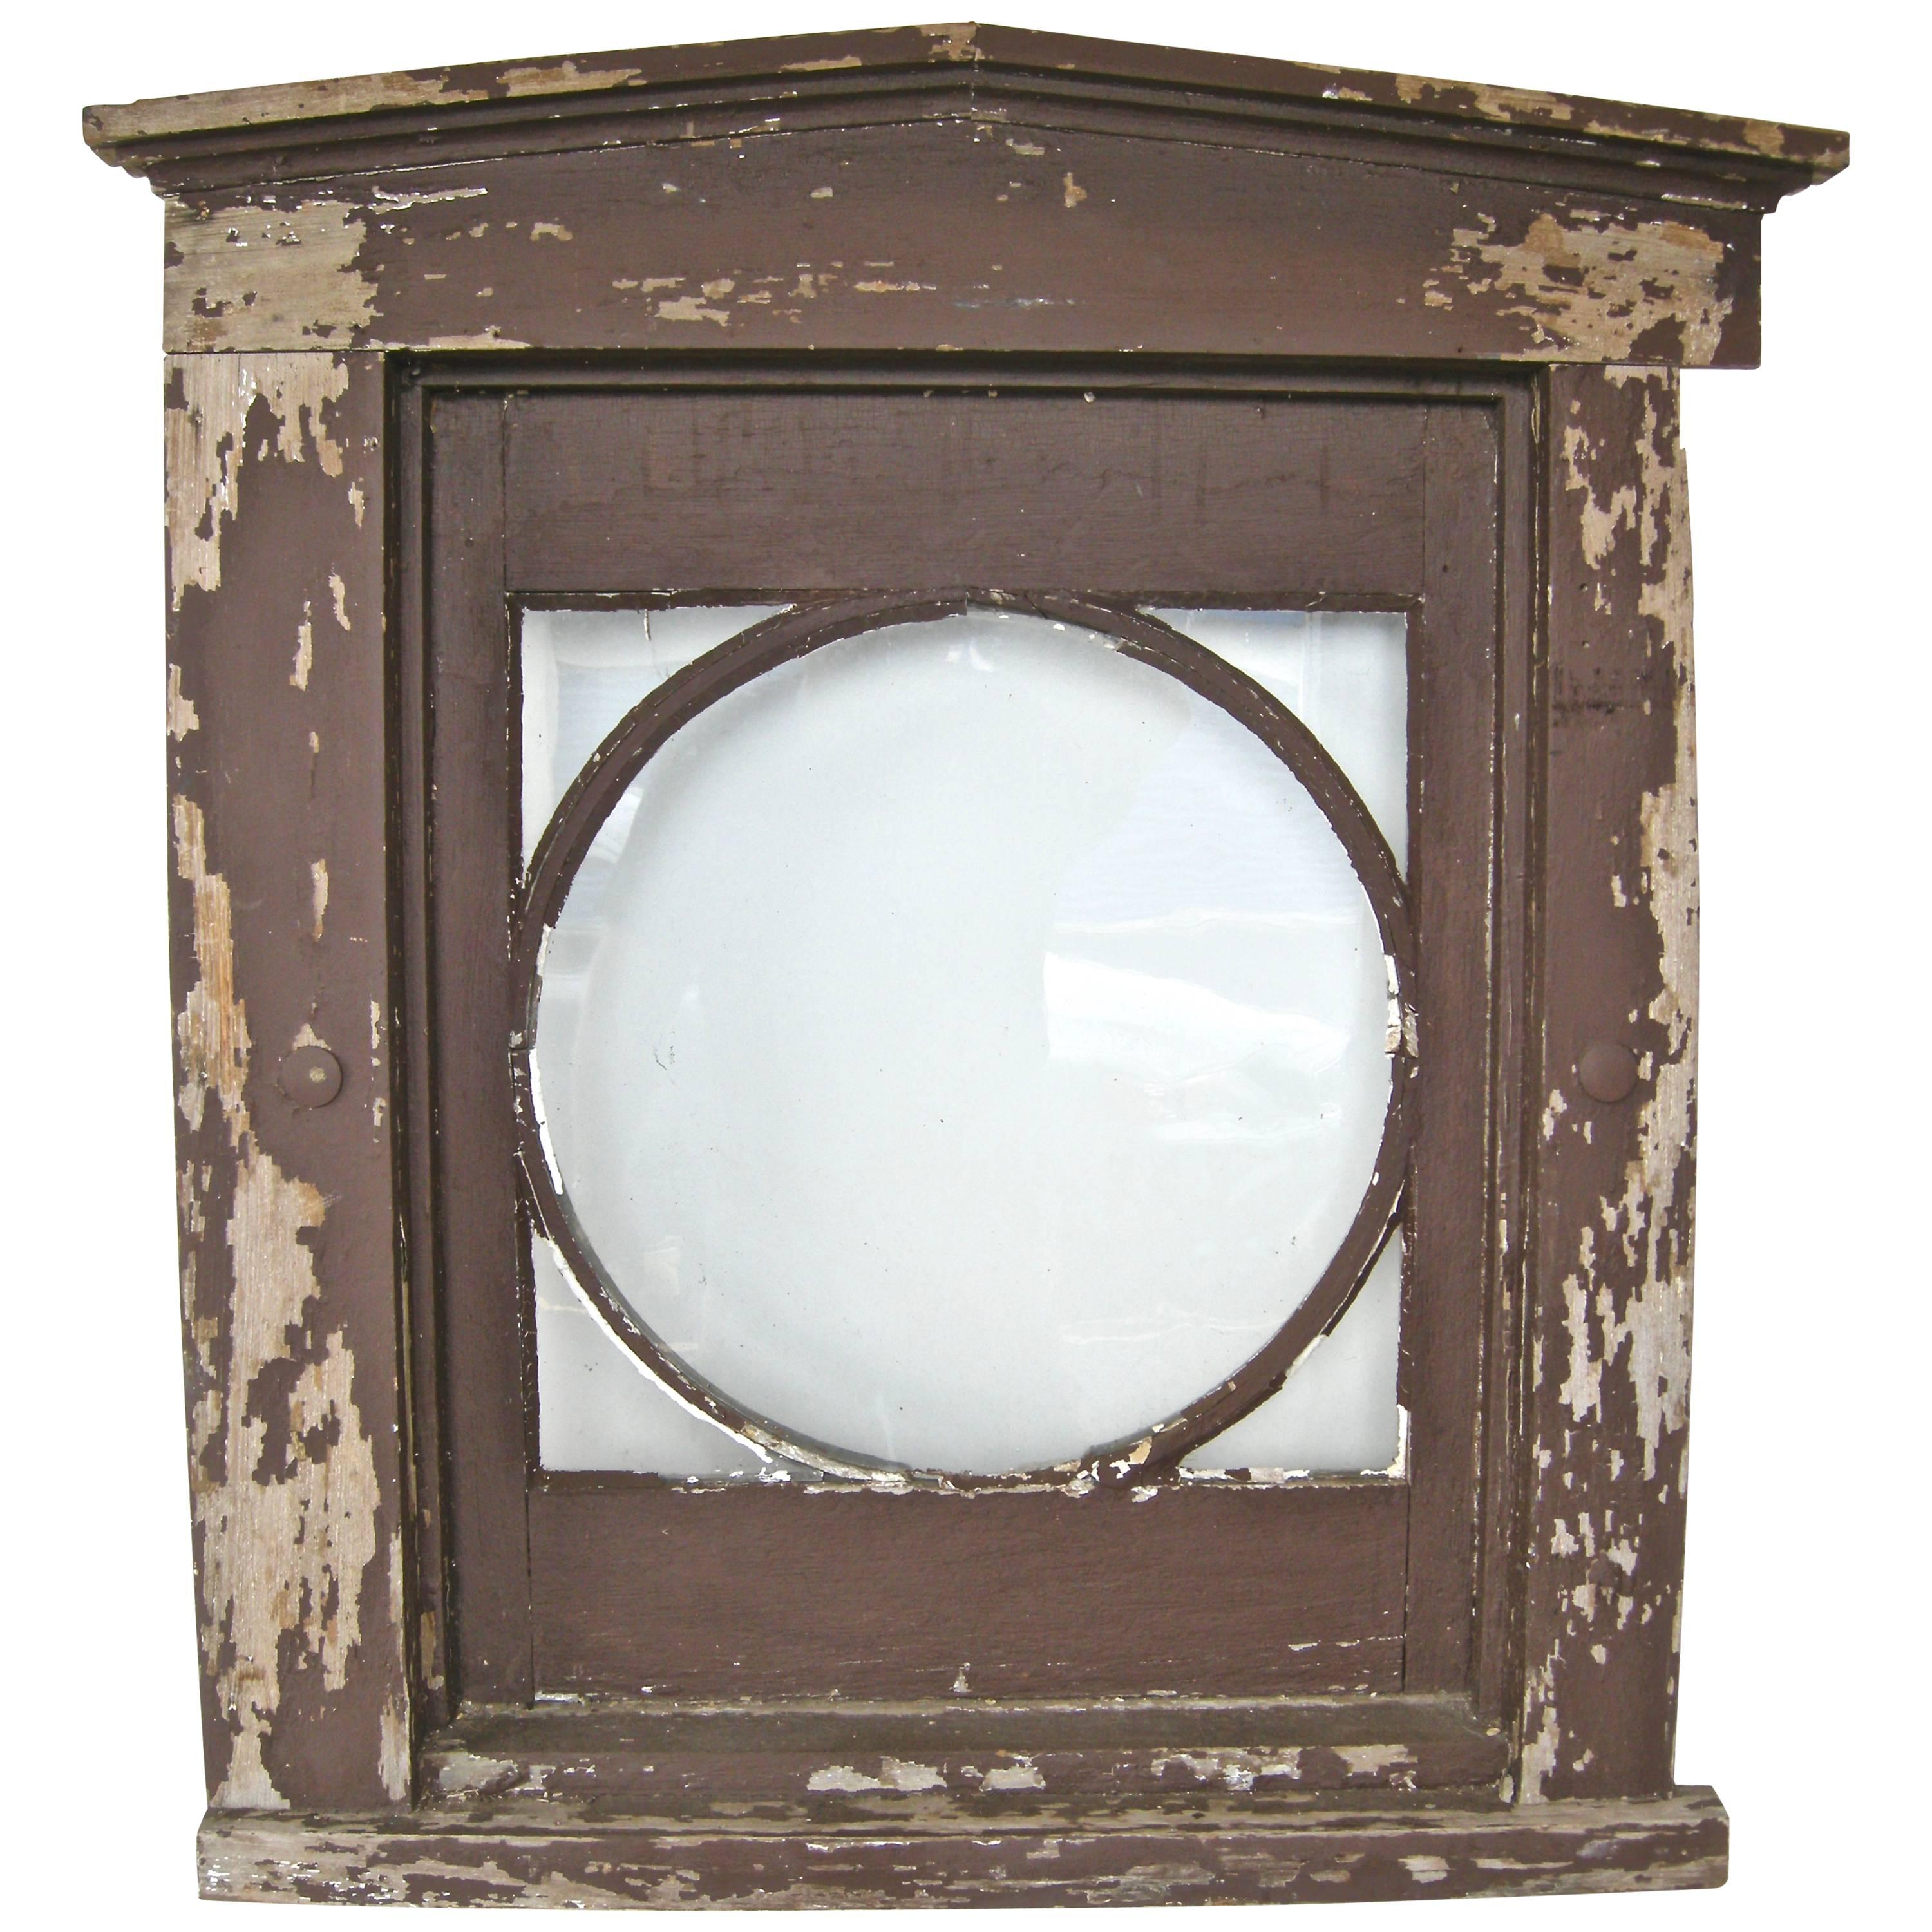 Early Classically Inspired Window For Sale